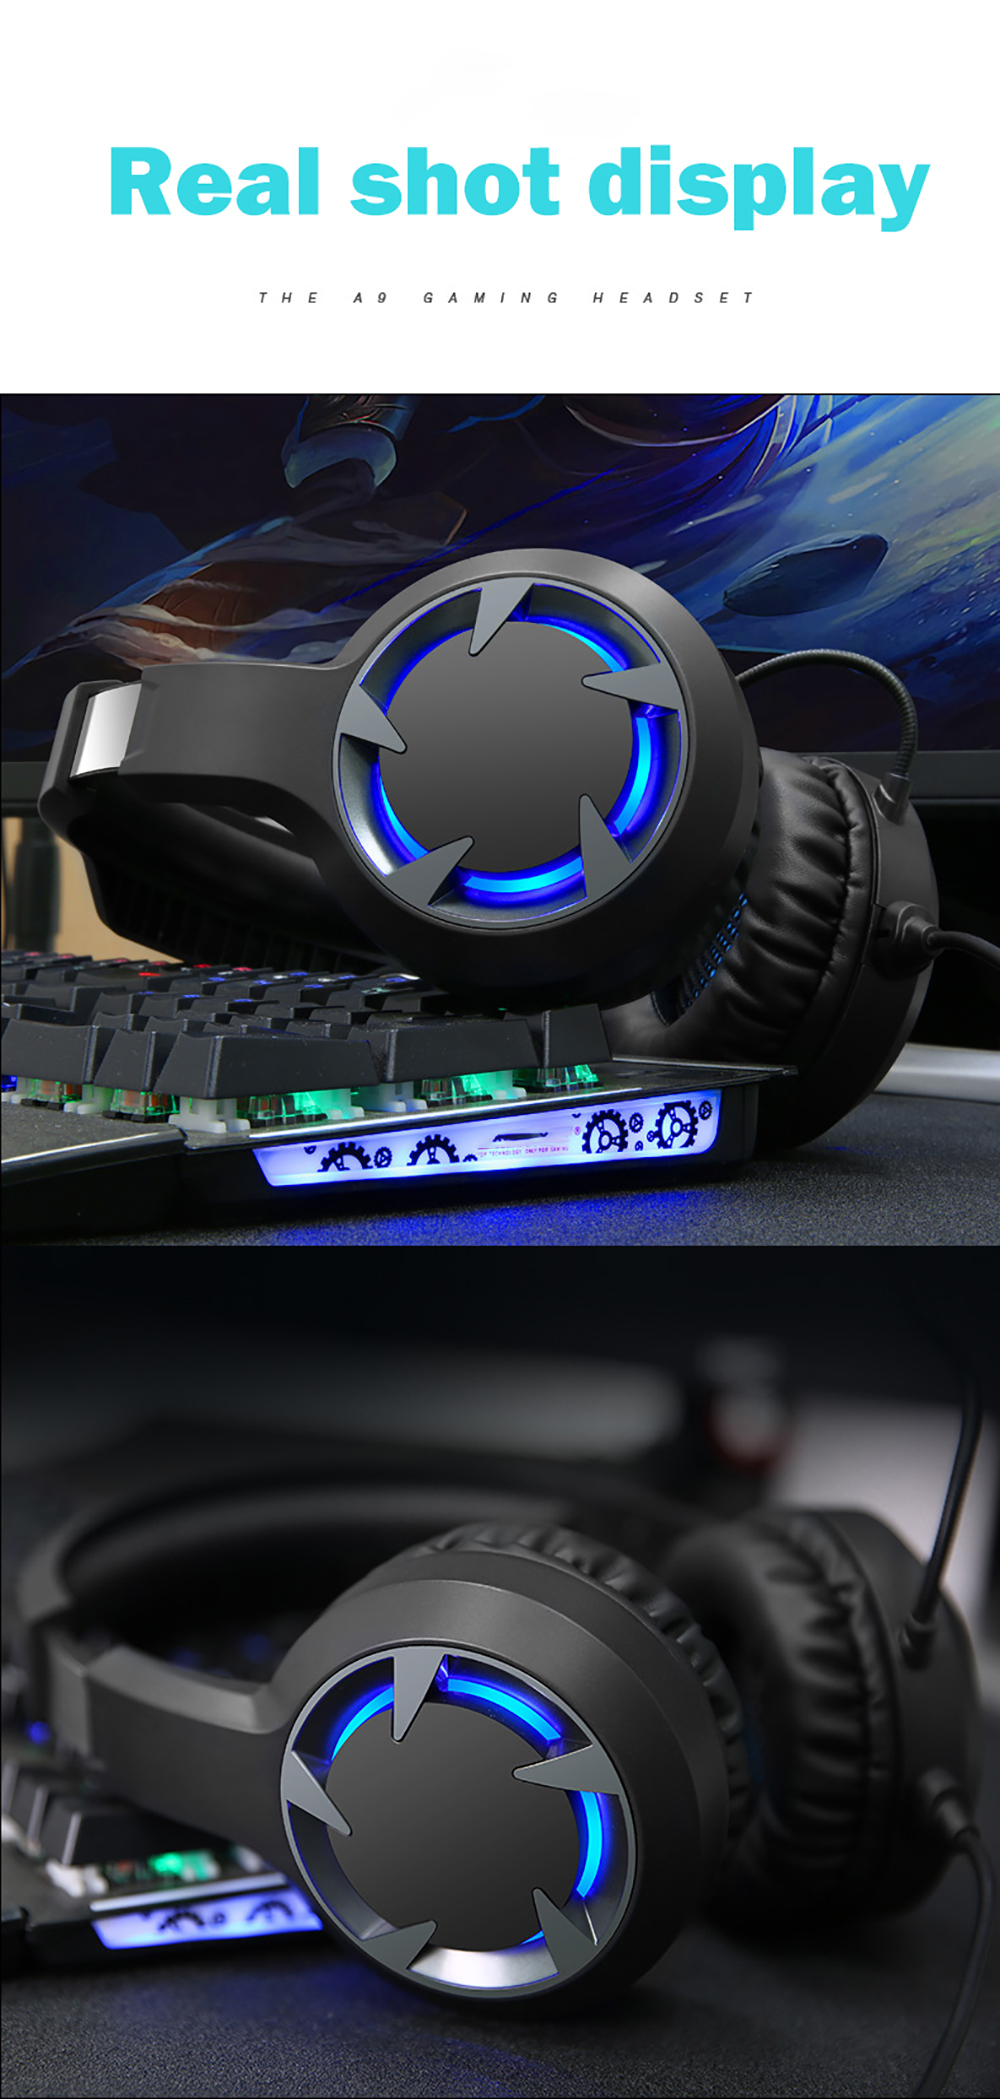 A9-Gamsing-Headset-Headphones-Over-Ear-Lightweight-Headsets-With-Mic-For-PS4-PC-Mobile-Phone-LED-Lig-1829495-9